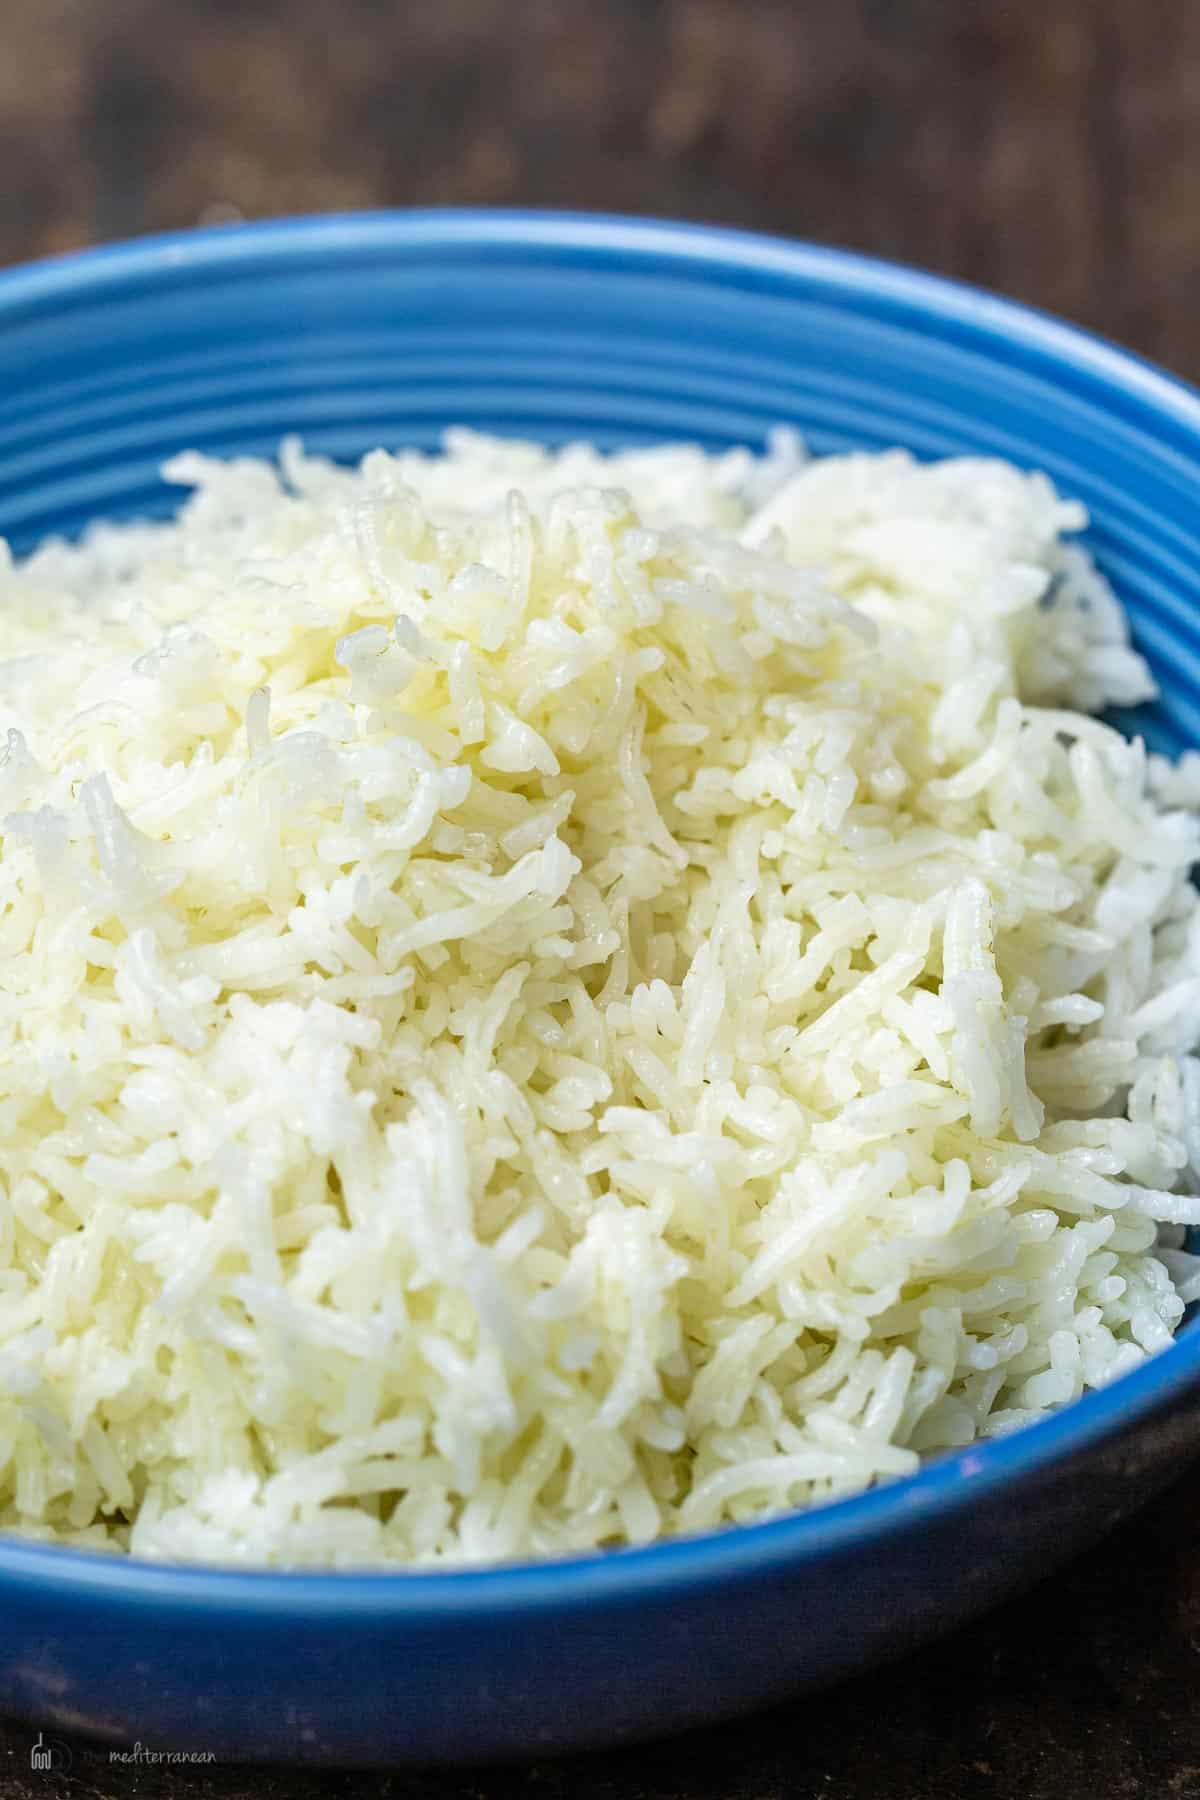 storage method - What's the best way to store rice long-term? - Seasoned  Advice